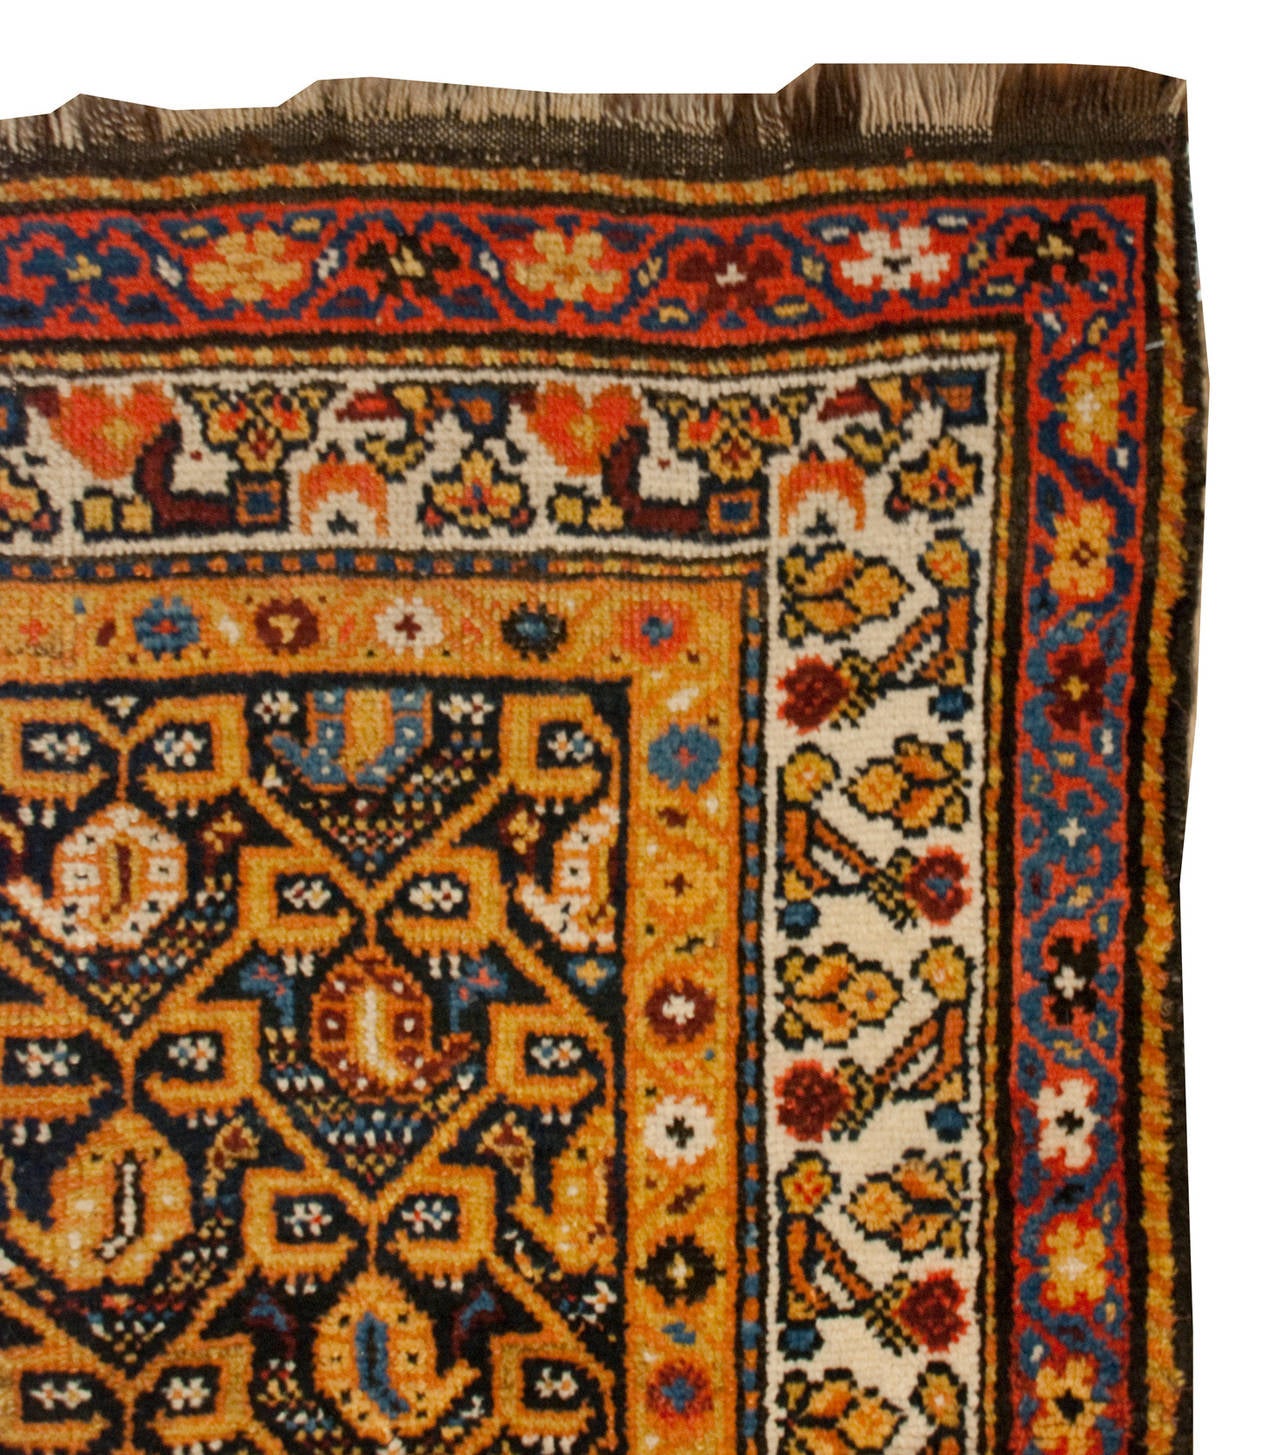 An early 20th century Persian Lori runner with a multicolored paisley pattern with a brilliant gold latticework pattern, surrounded by multiple complementary floral borders.